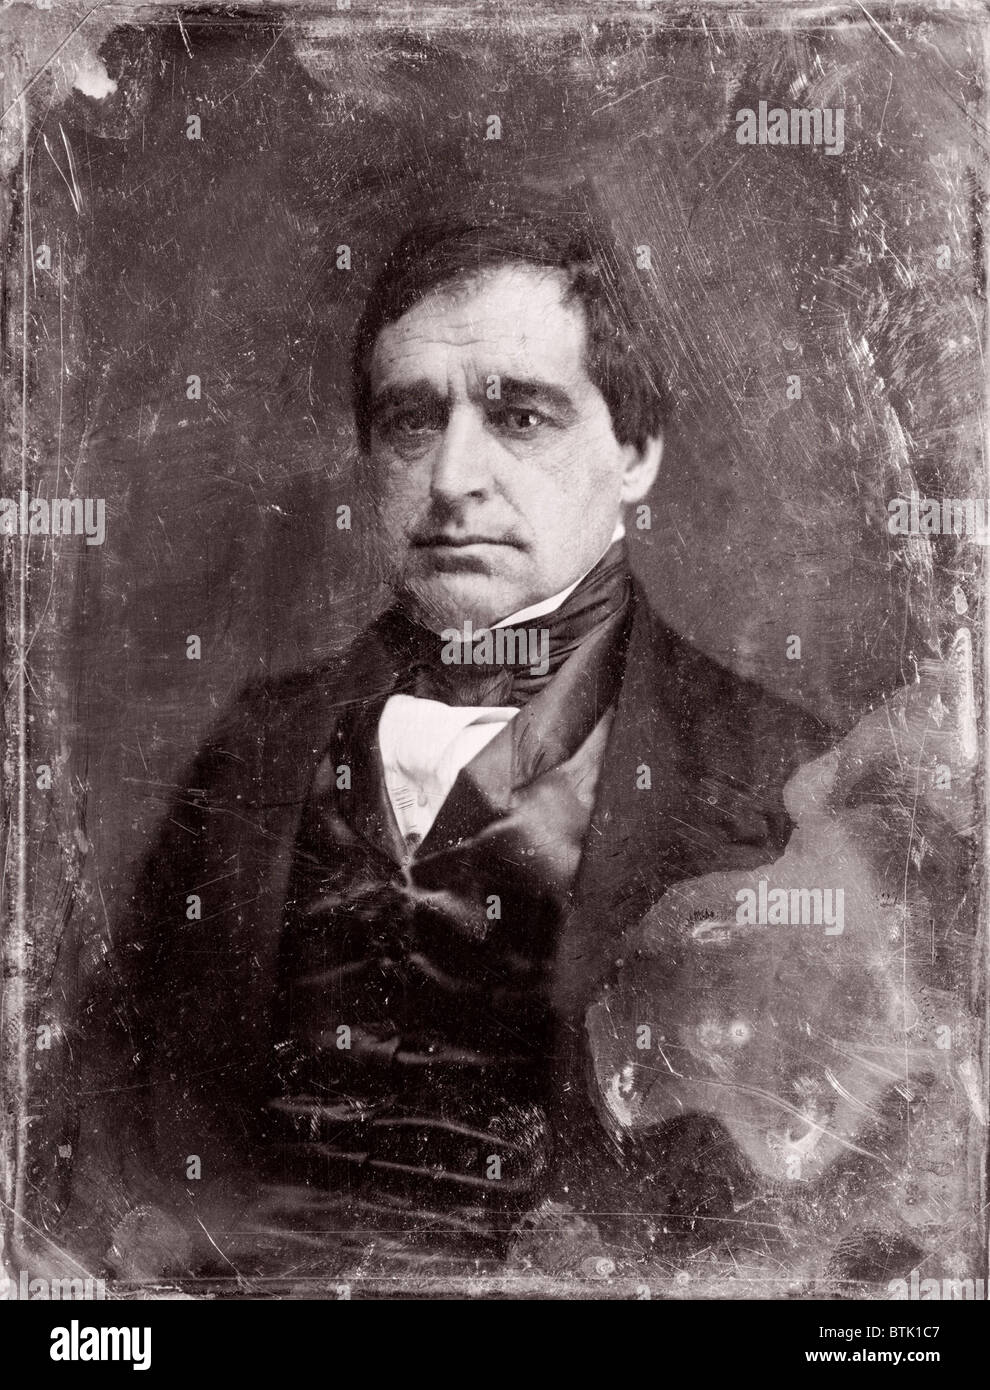 Hannibal Hamlin (1809-1891) had to leave the Senate to be Lincoln's reluctant Vice President from 1861-65. He returned for two more terms in 1869 and supported the punitive Reconstruction policies of the Radical Republicans. Stock Photo